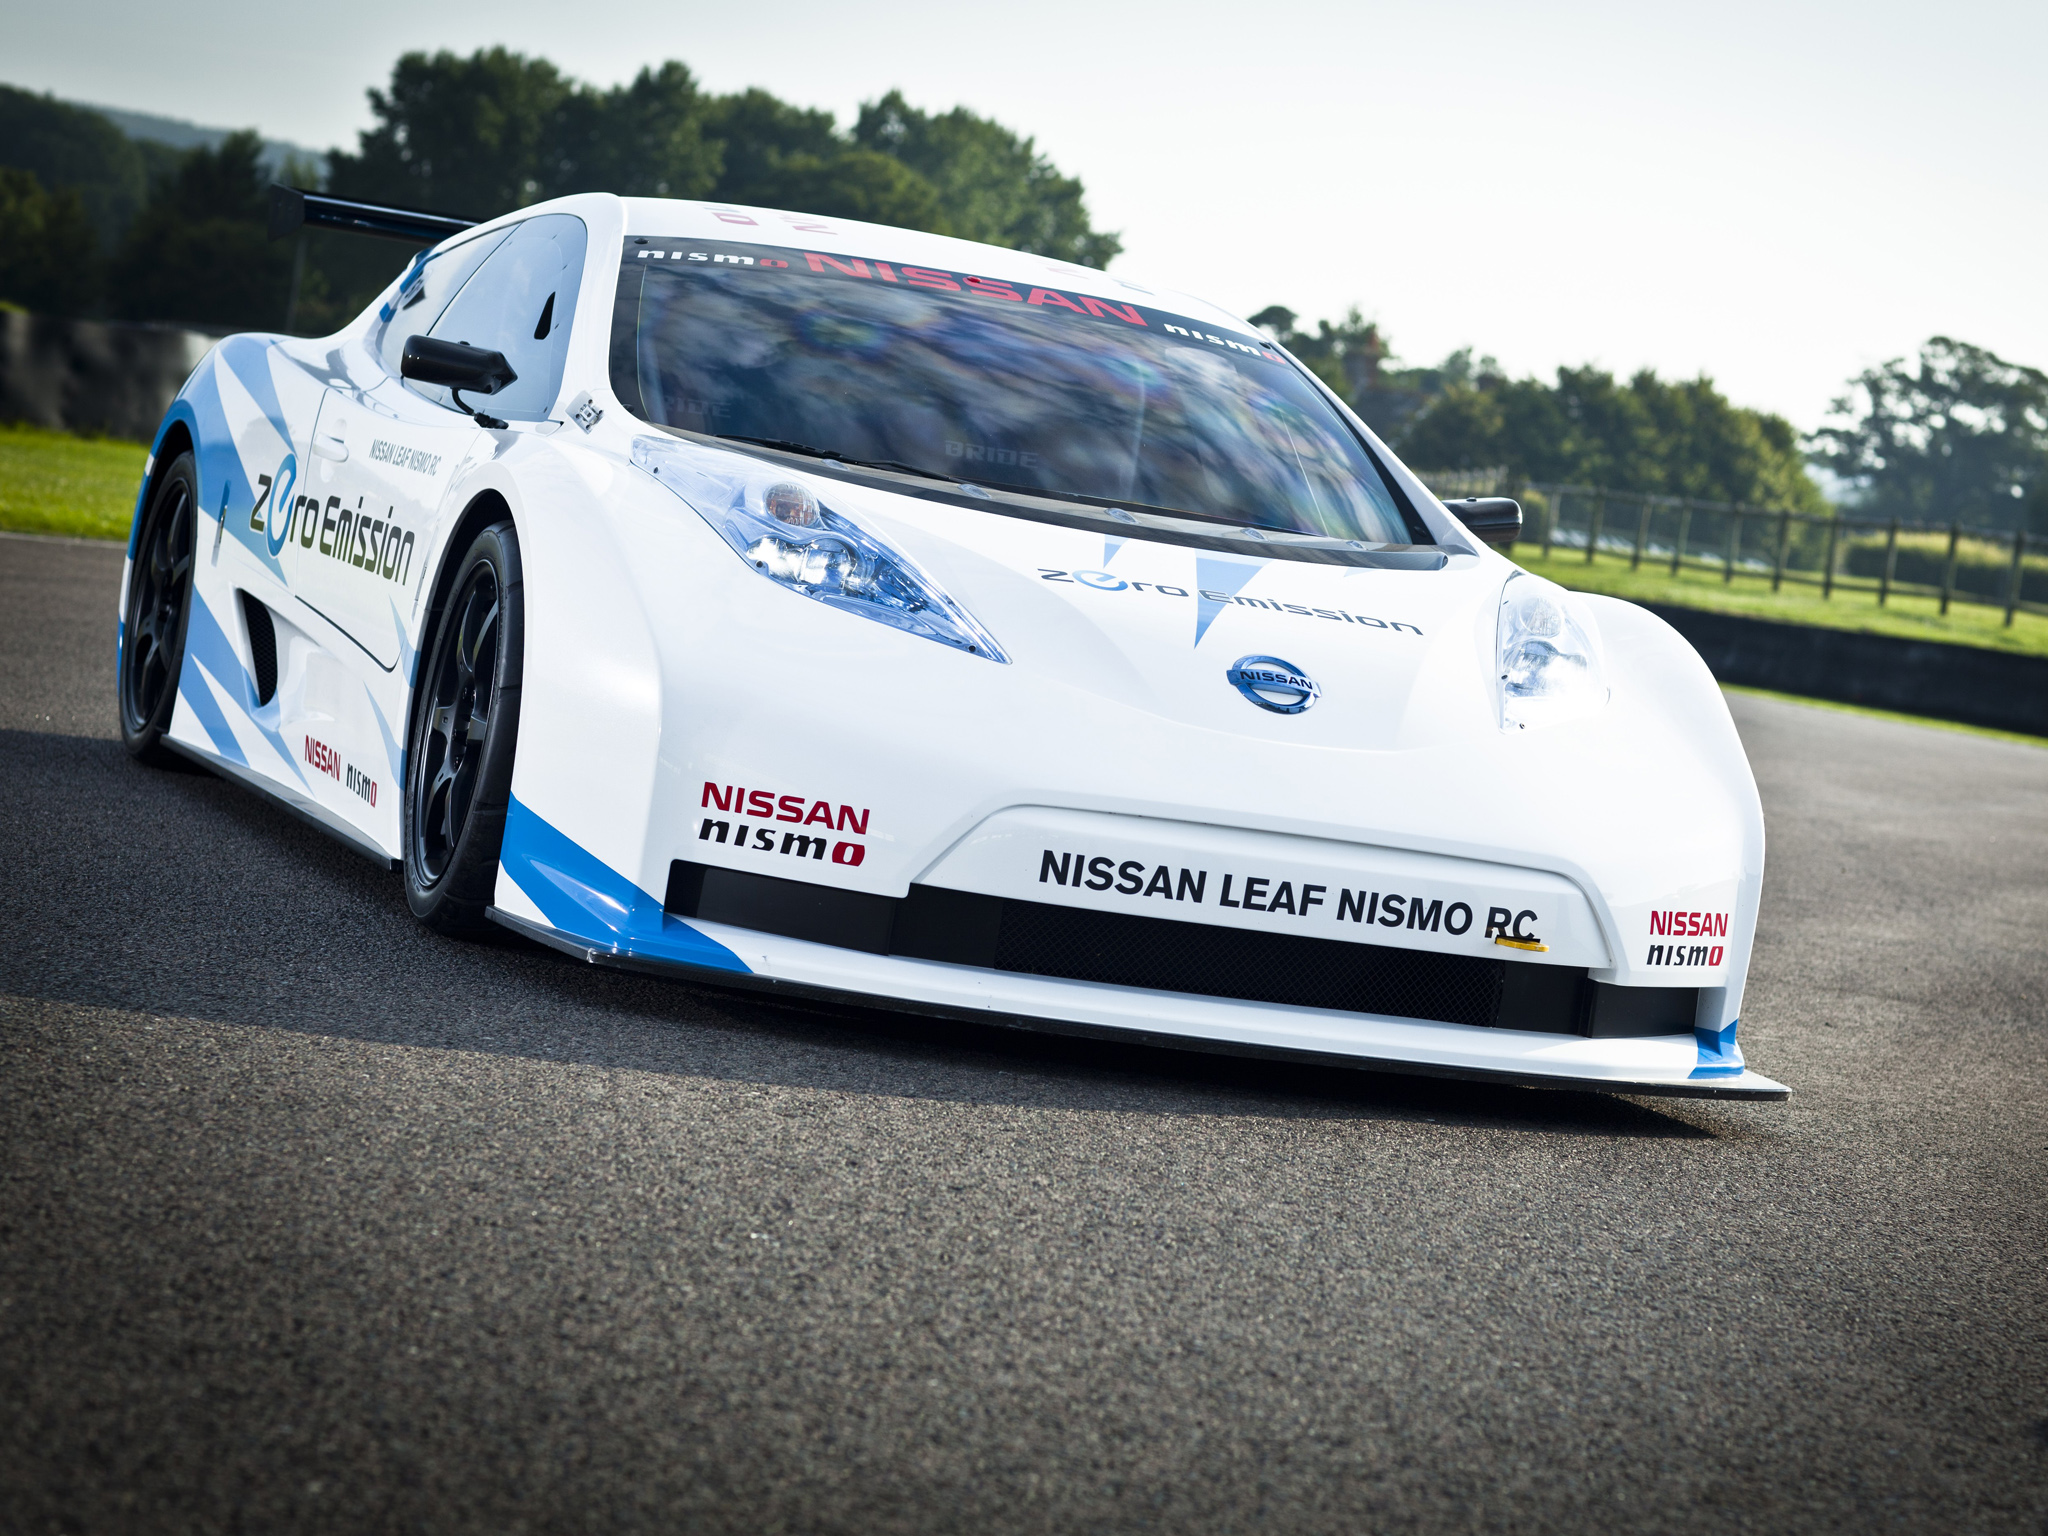 2011, Nissan, Leaf, Nismo, R c, Race, Racing, Tuning, Electric, Supercar, Supercars Wallpaper